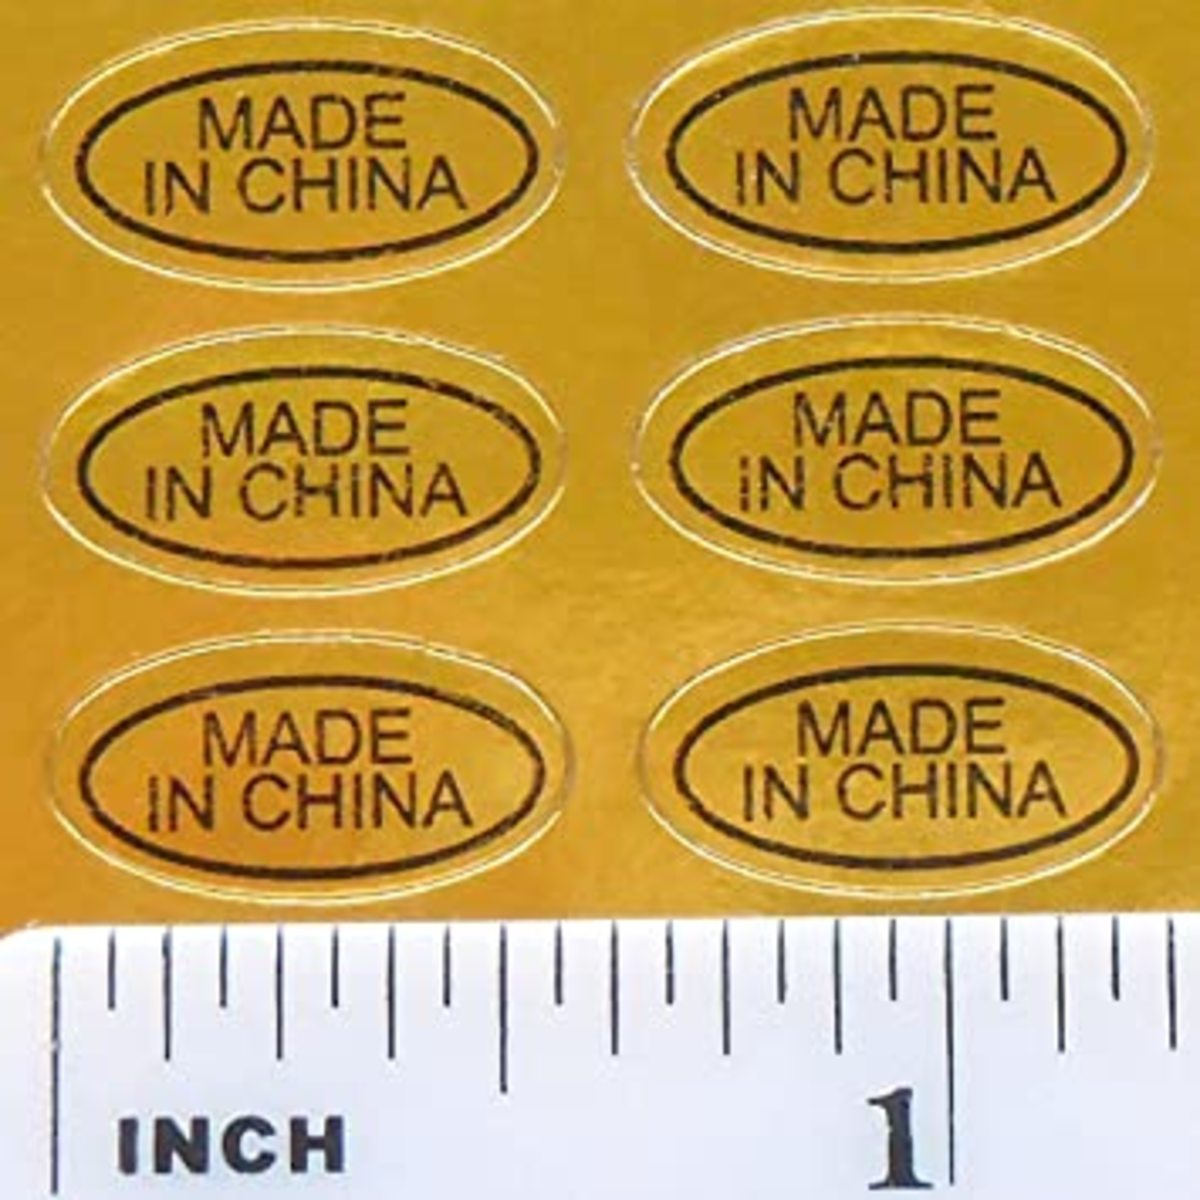 Made in China; Hopefully Means, Not Made to Last